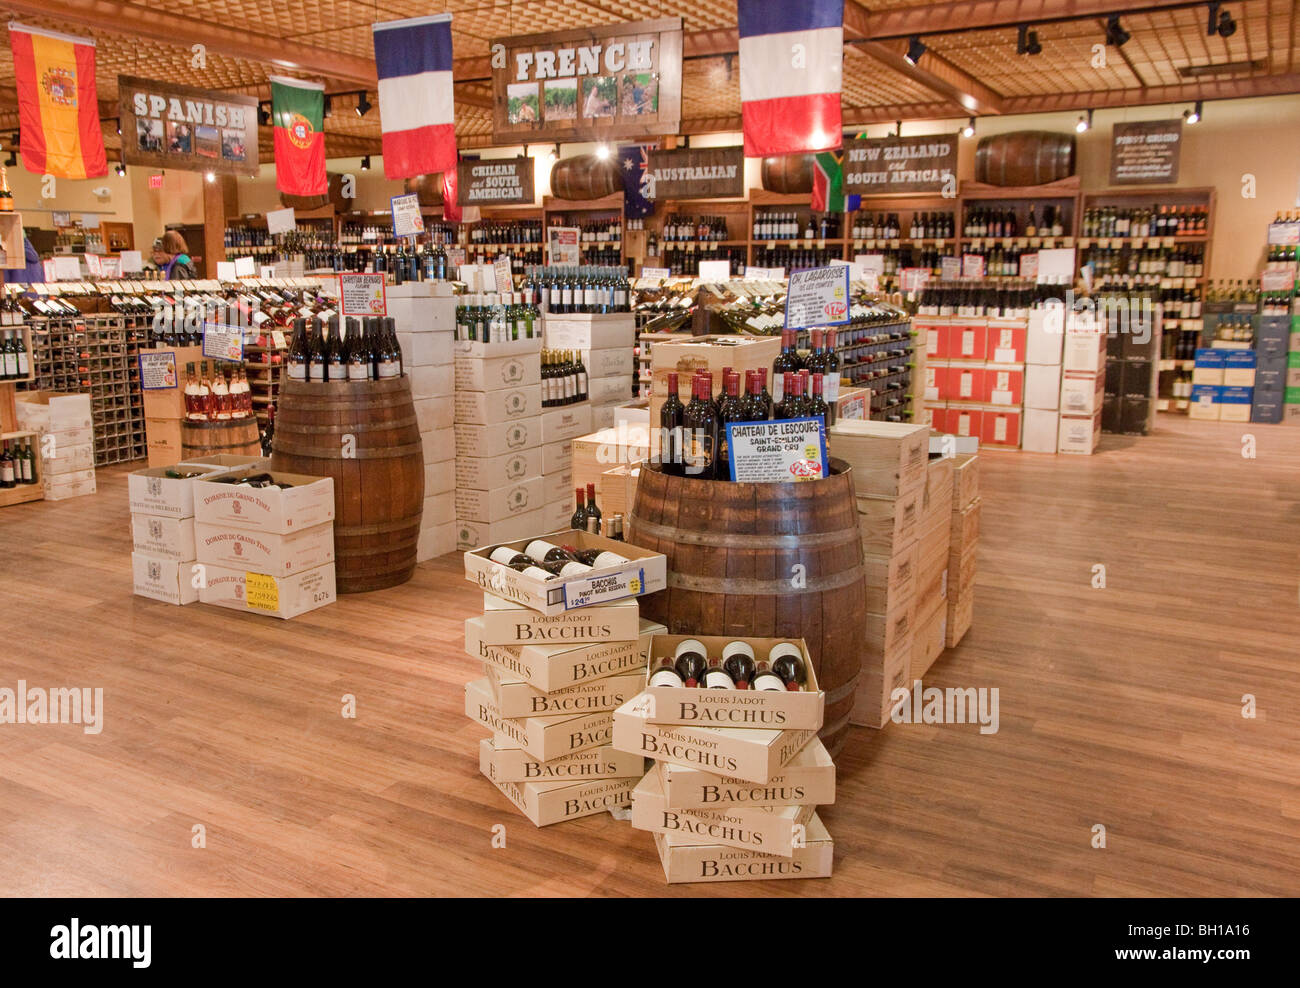 Stew Leonard’s Wines store displaying wines from various regions of the world. Stock Photo